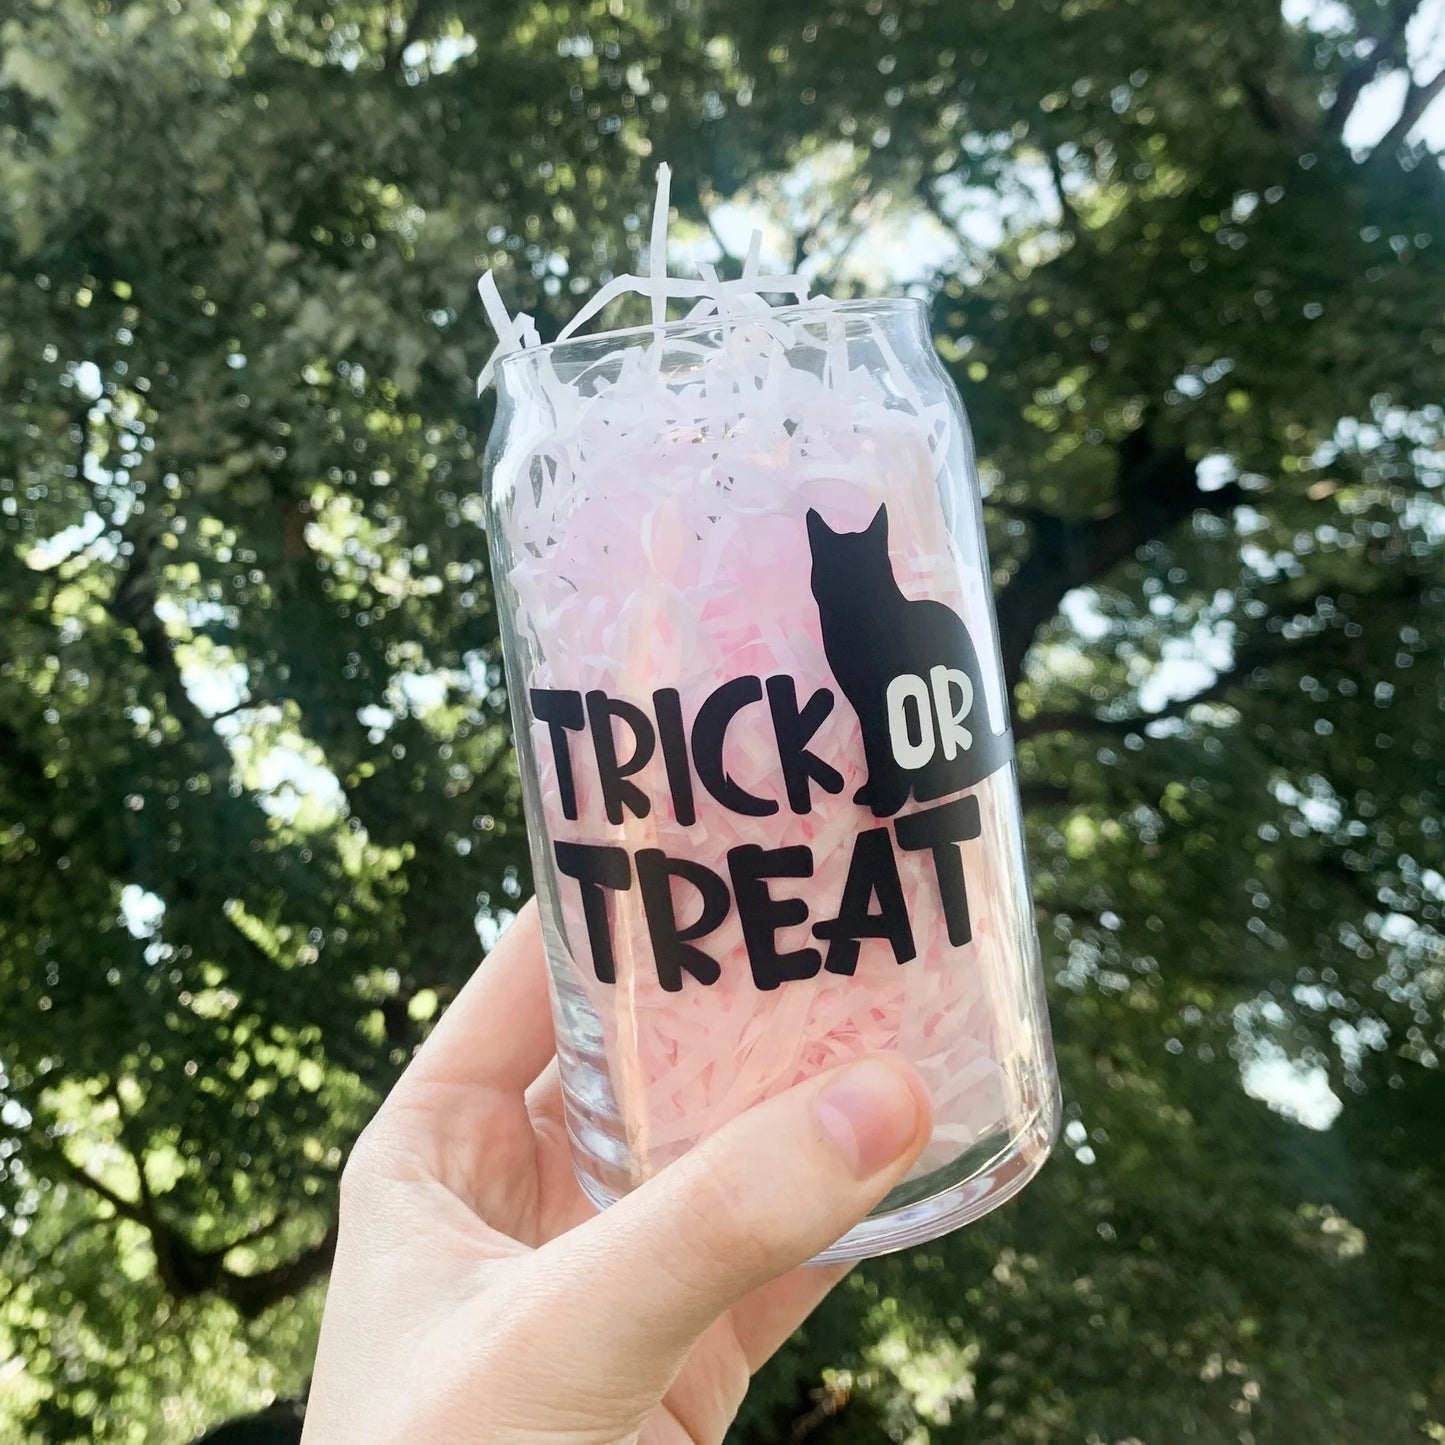 A hand holding trick or treat glass Halloween cup up in the air with a tree as the background.